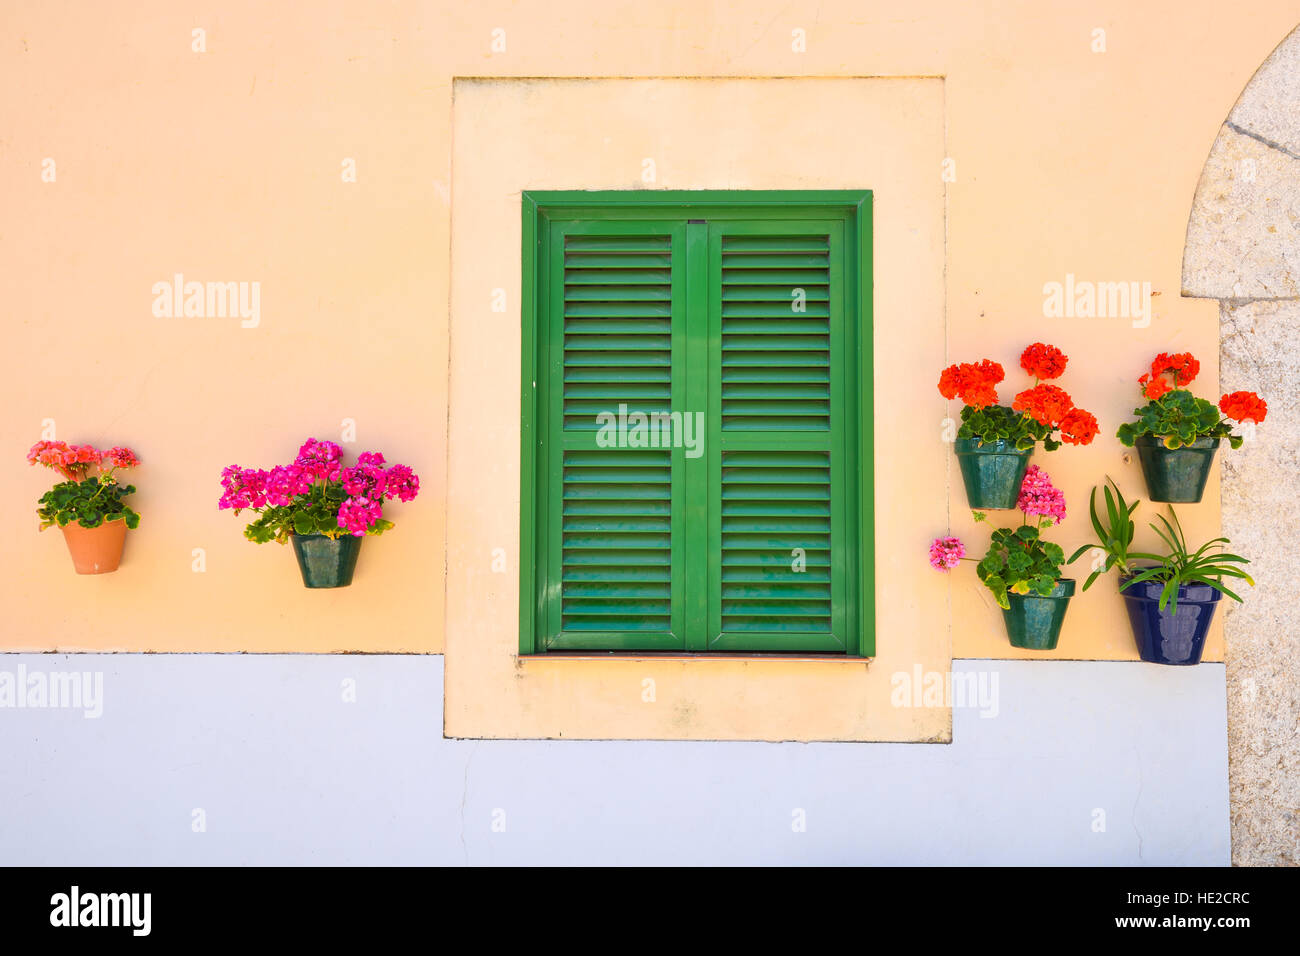 Green window shutters with a wall with blooming flowers Stock Photo